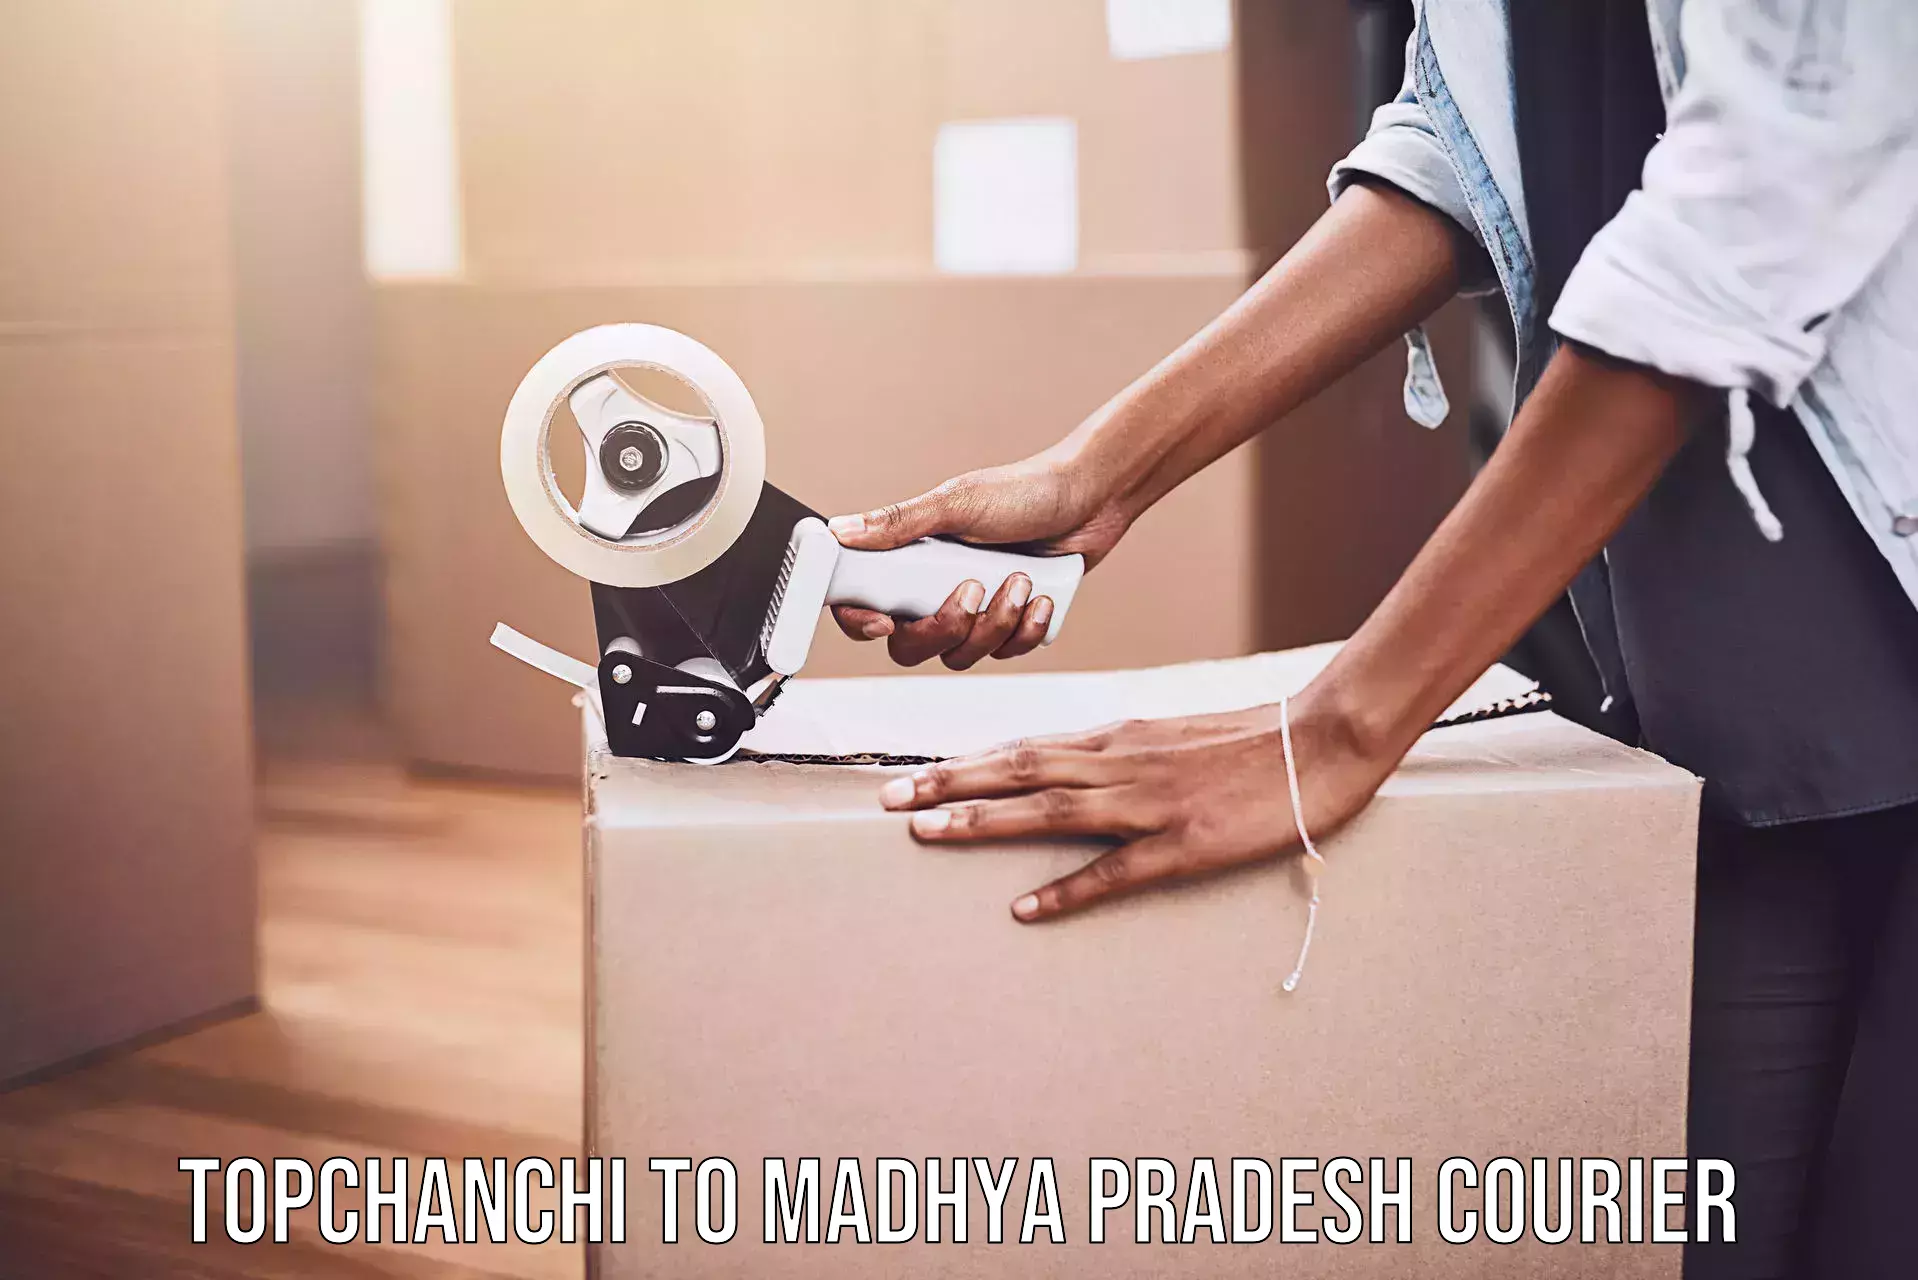 Multi-service courier options Topchanchi to IIIT Bhopal